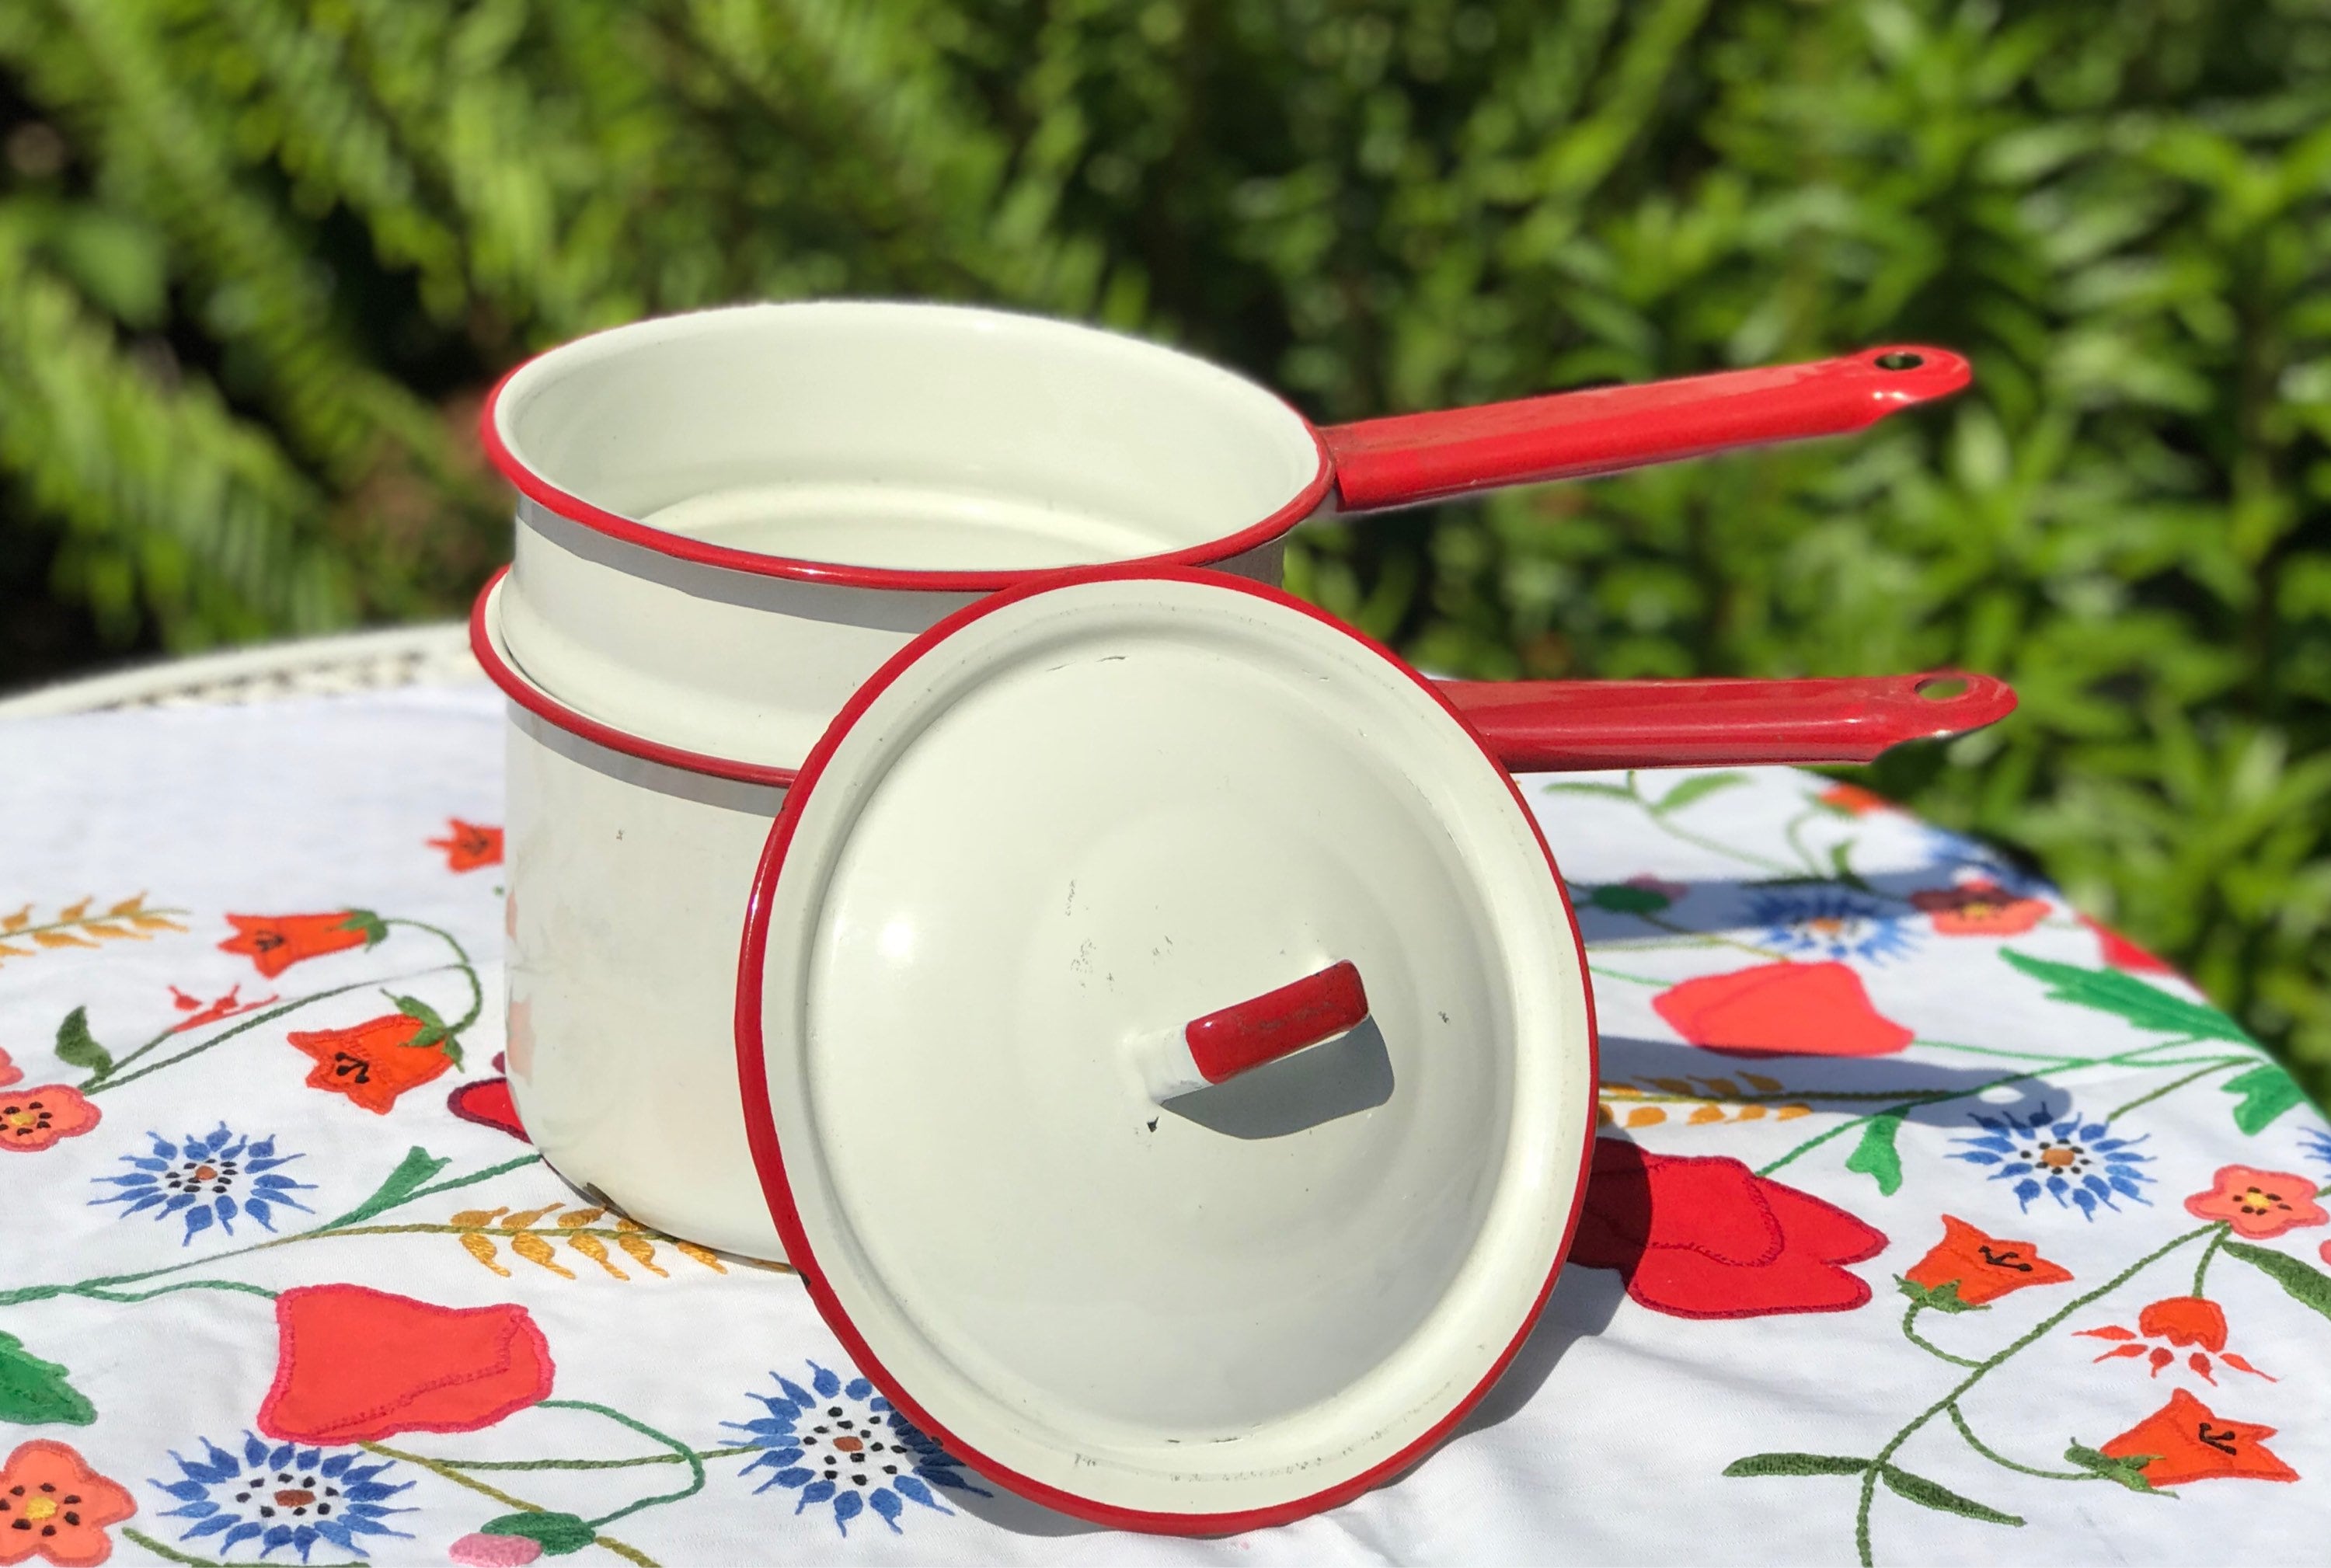 Vintage Enamelware Cookware Pots Double Boiler Set Red and White 9